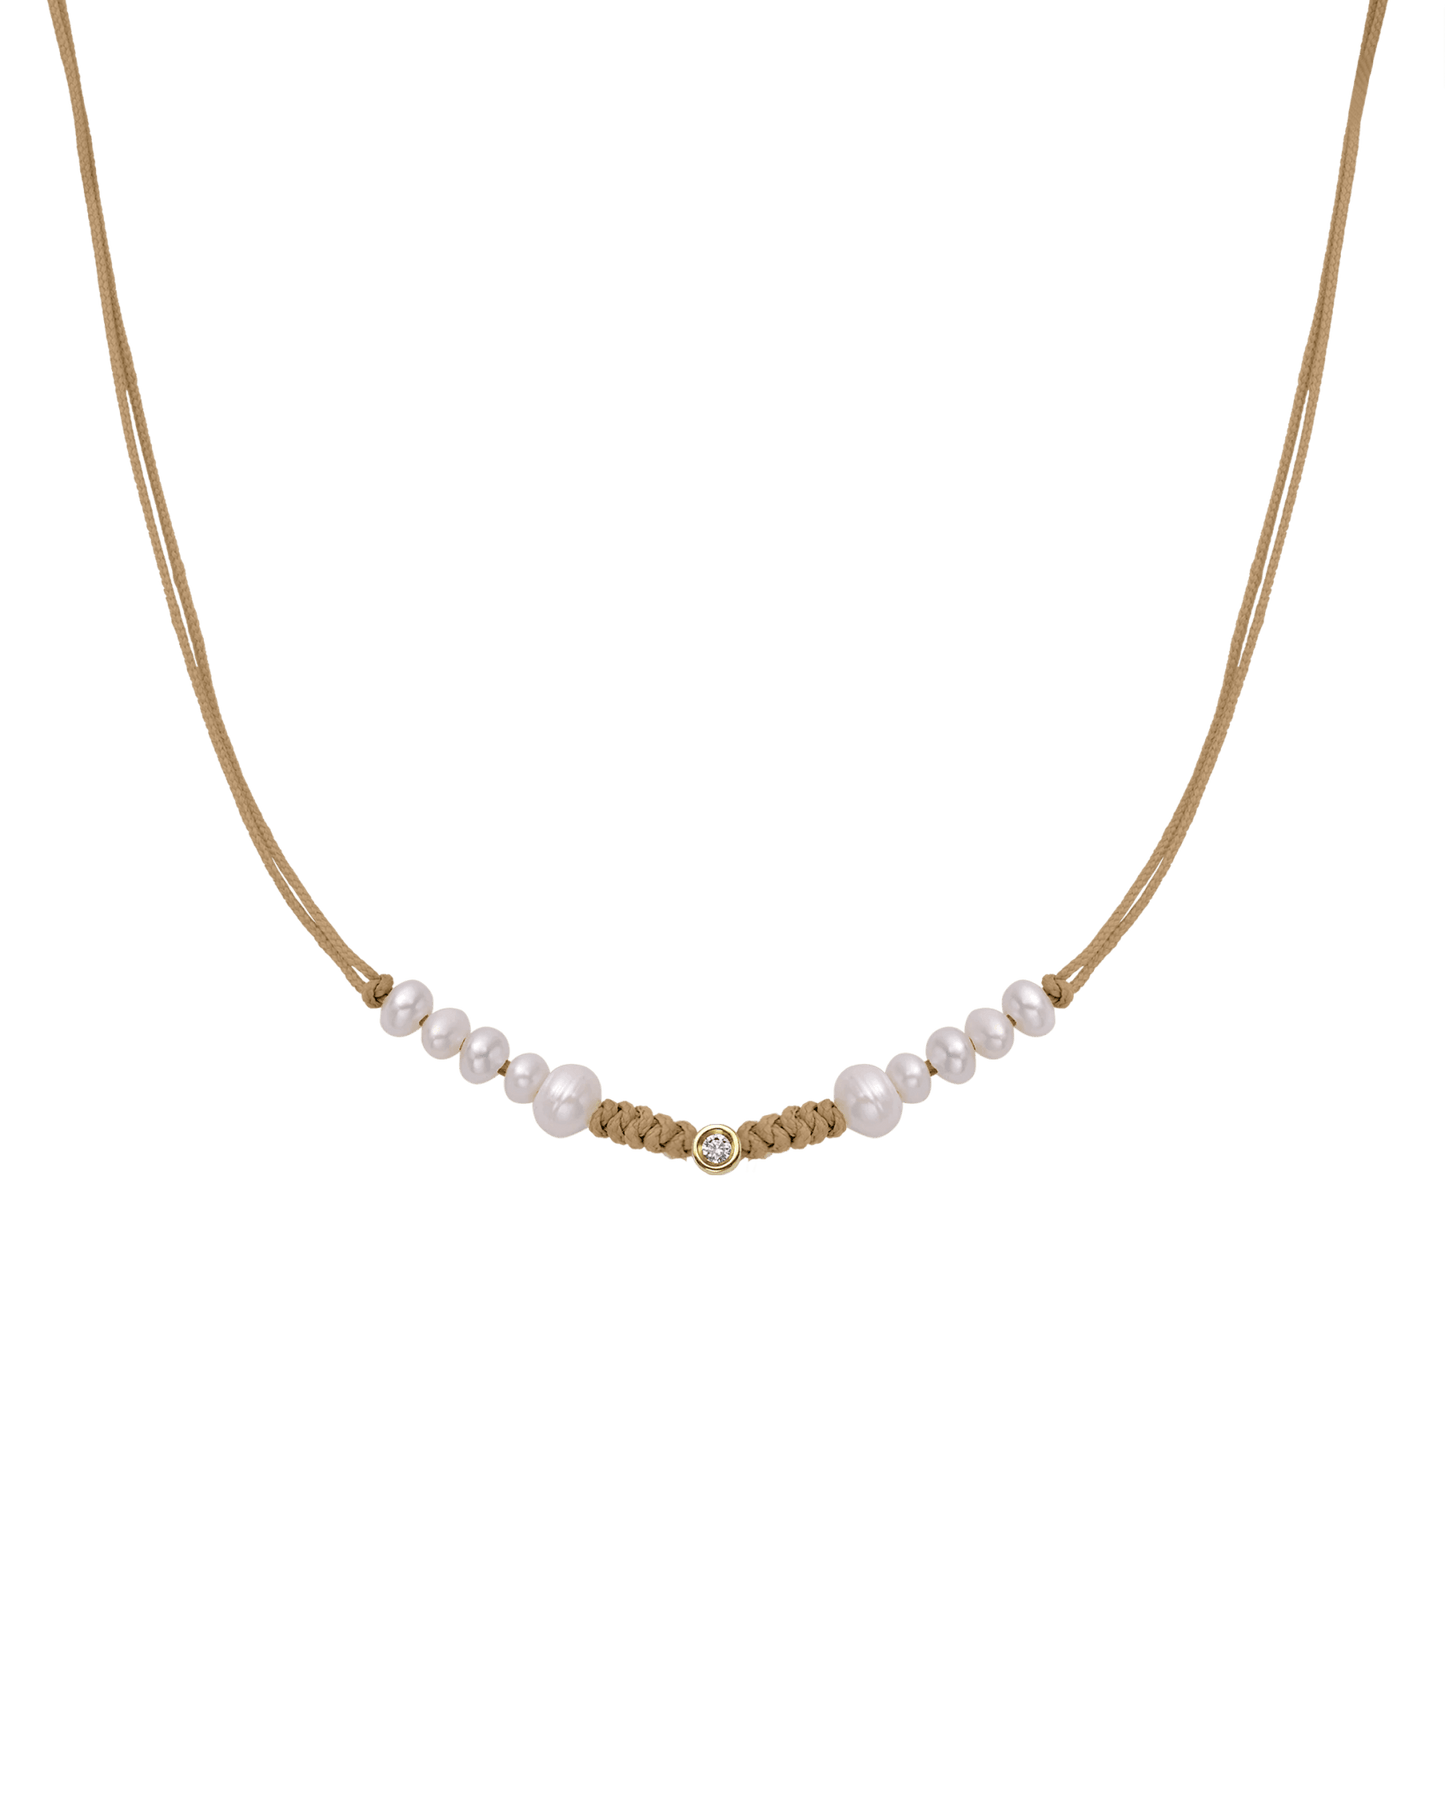 Ten Natural Pearl String of Love Necklace - 14K Yellow Gold Necklaces 14K Solid Gold Camel Small: 0.03ct 